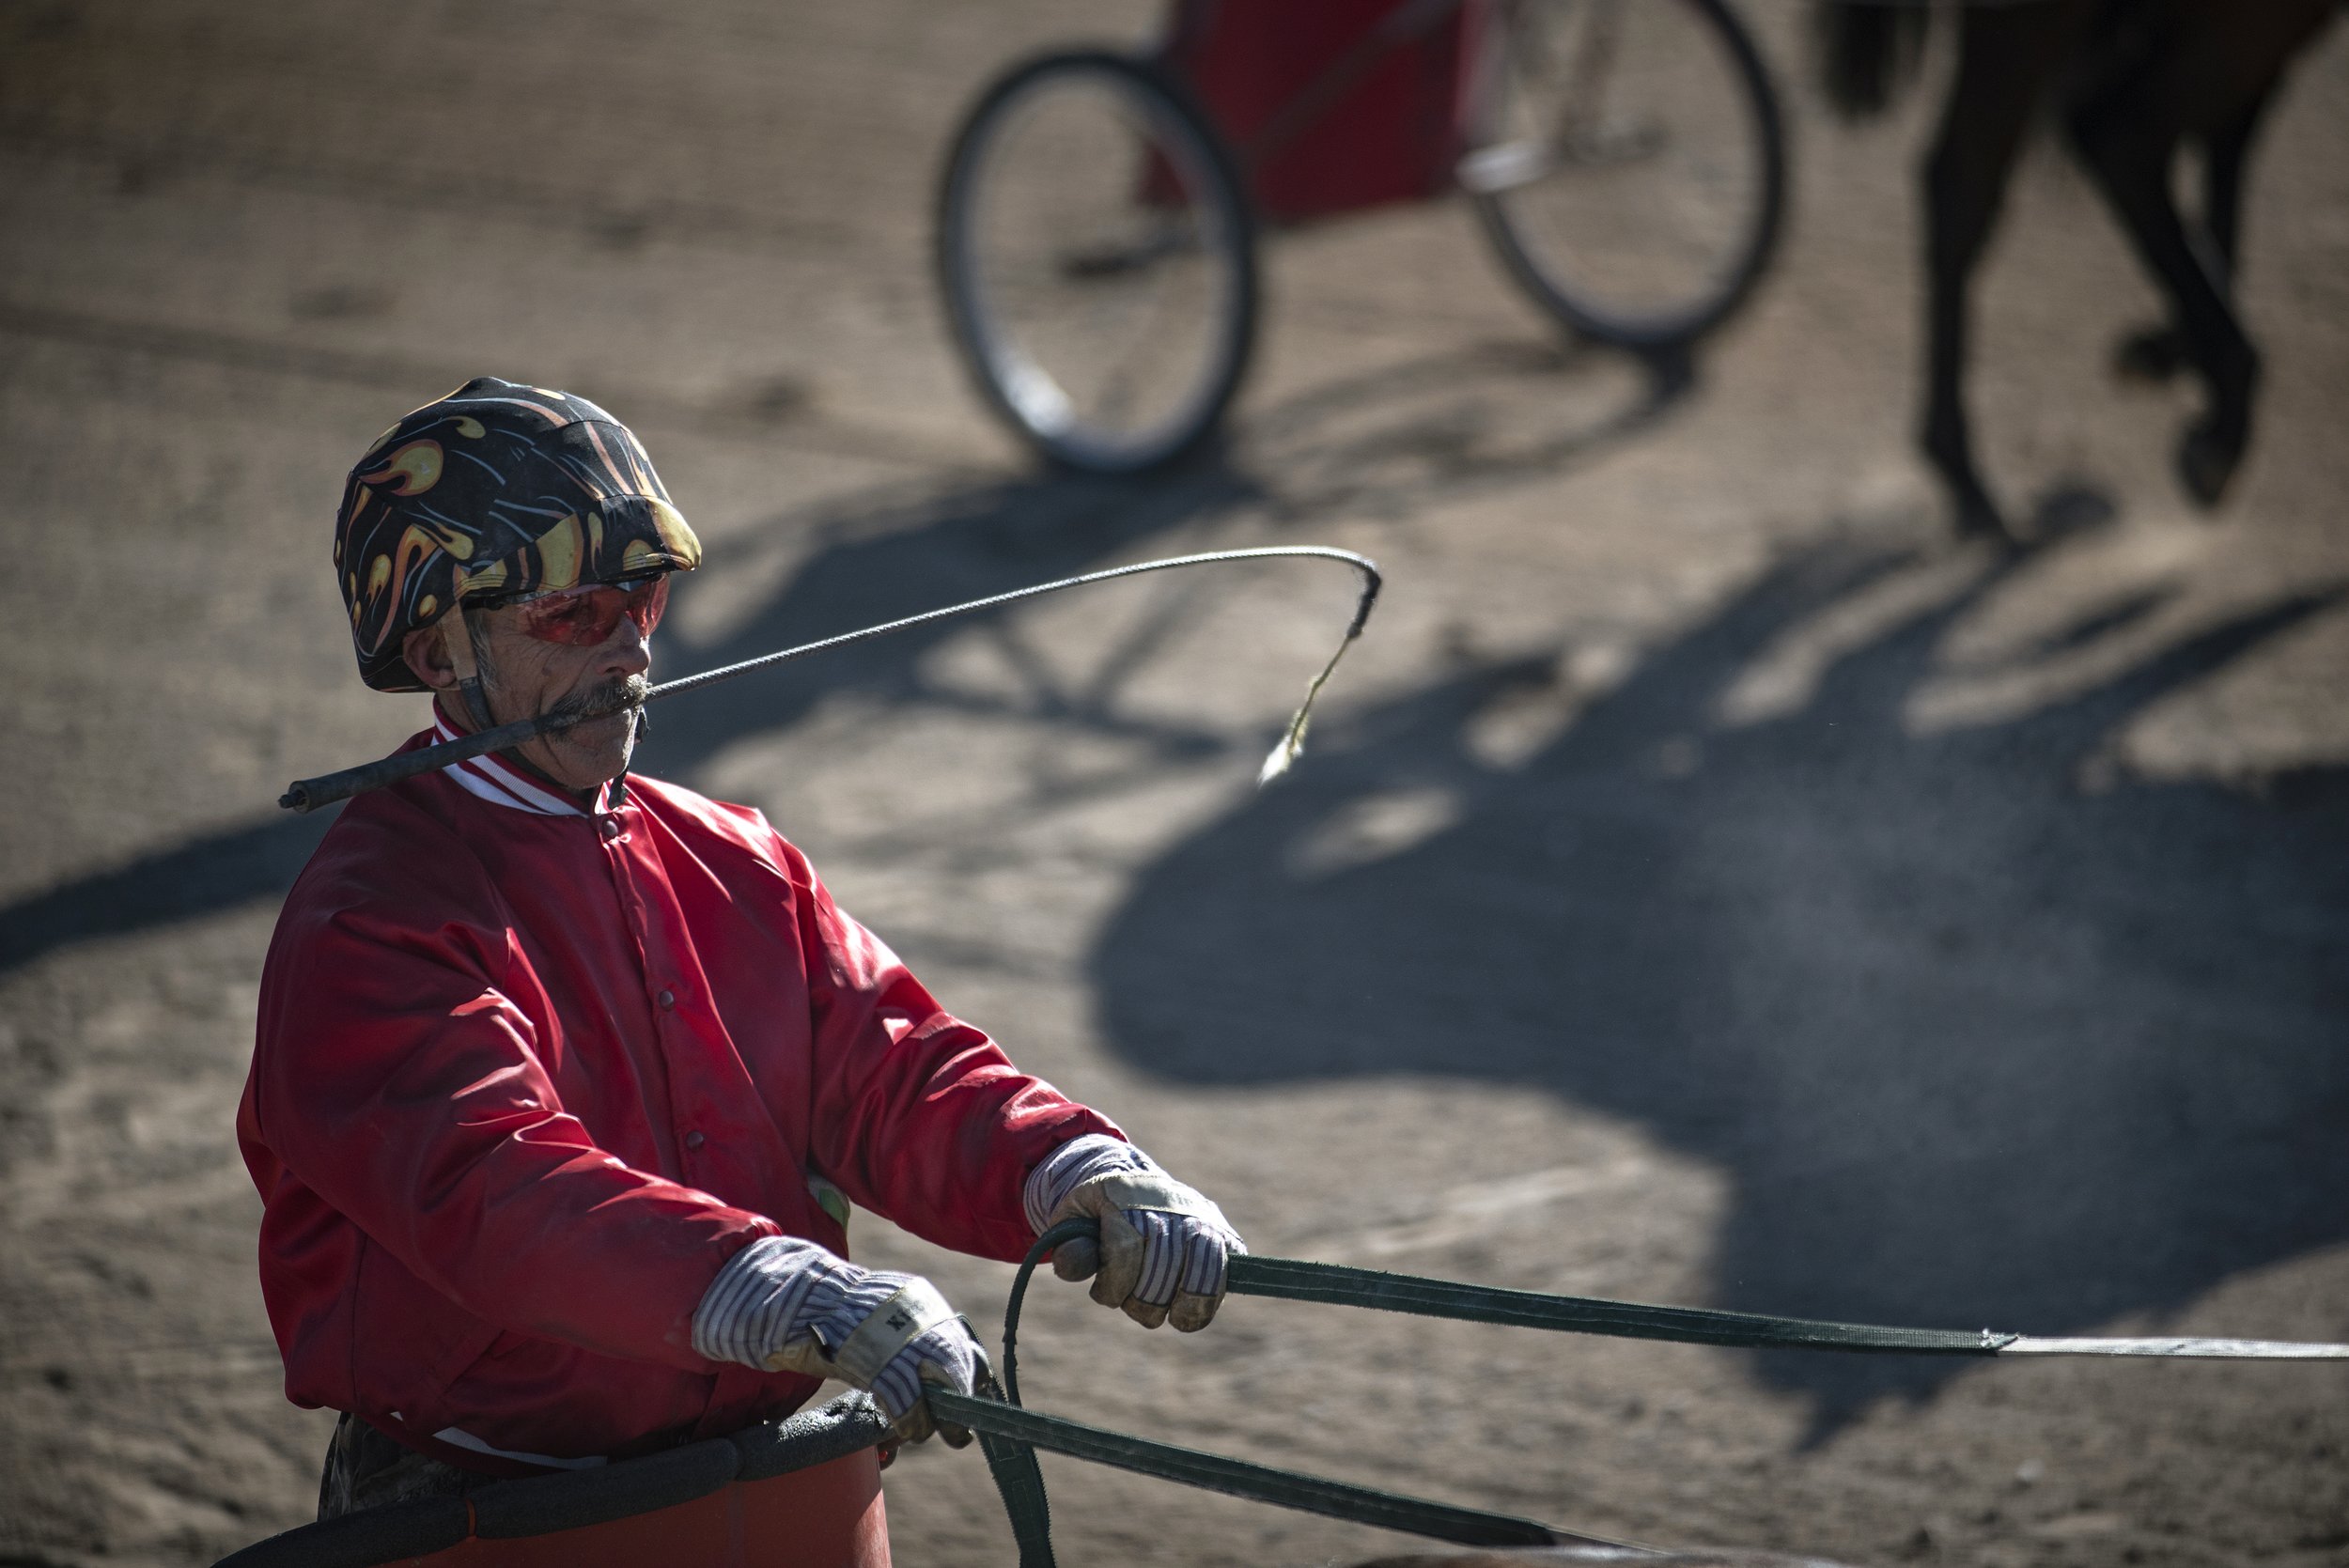  Tom Nelson of Equine Addiction warms up his team before competing in on Nov. 29, 2020 in Afton, Wy. The two-day racing event honored the heritage of cutter and chariot racing while also benefiting families of fallen military service members.  